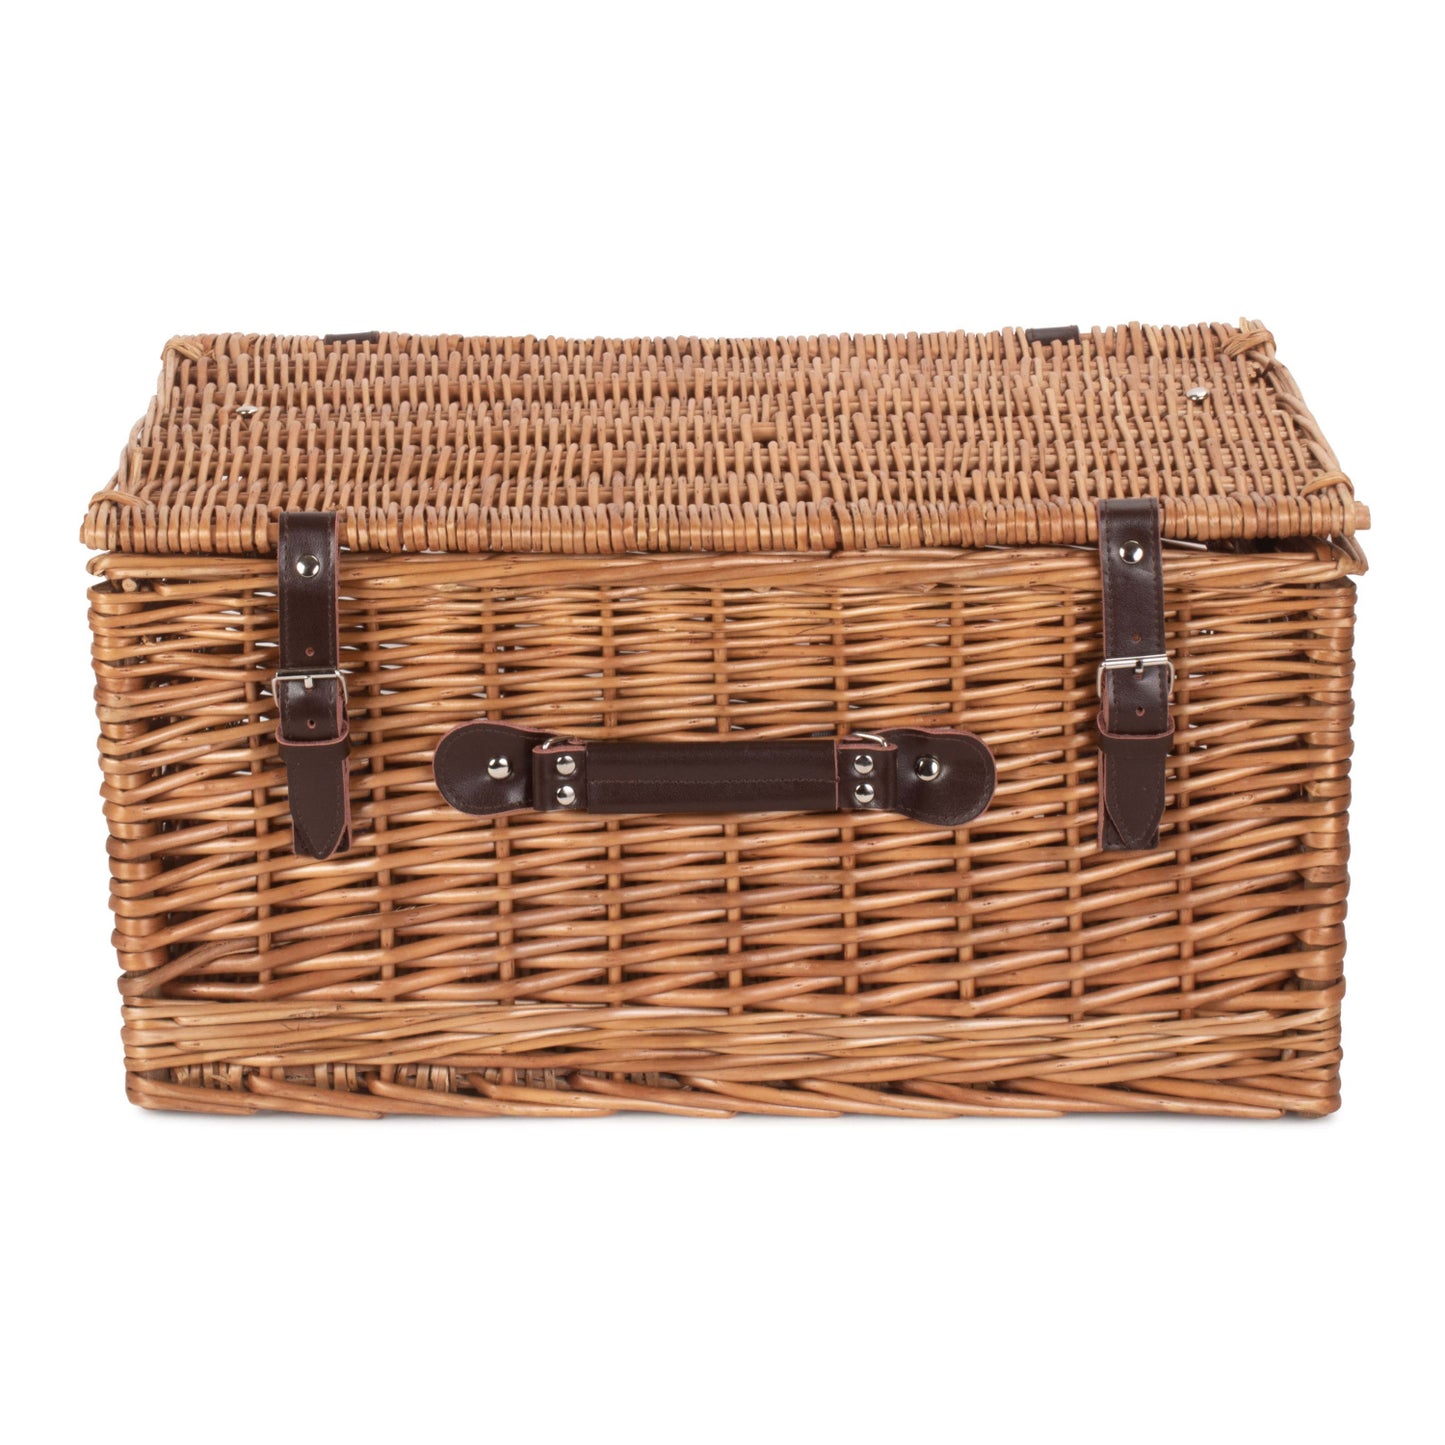 20 Inch Double Steamed Hamper